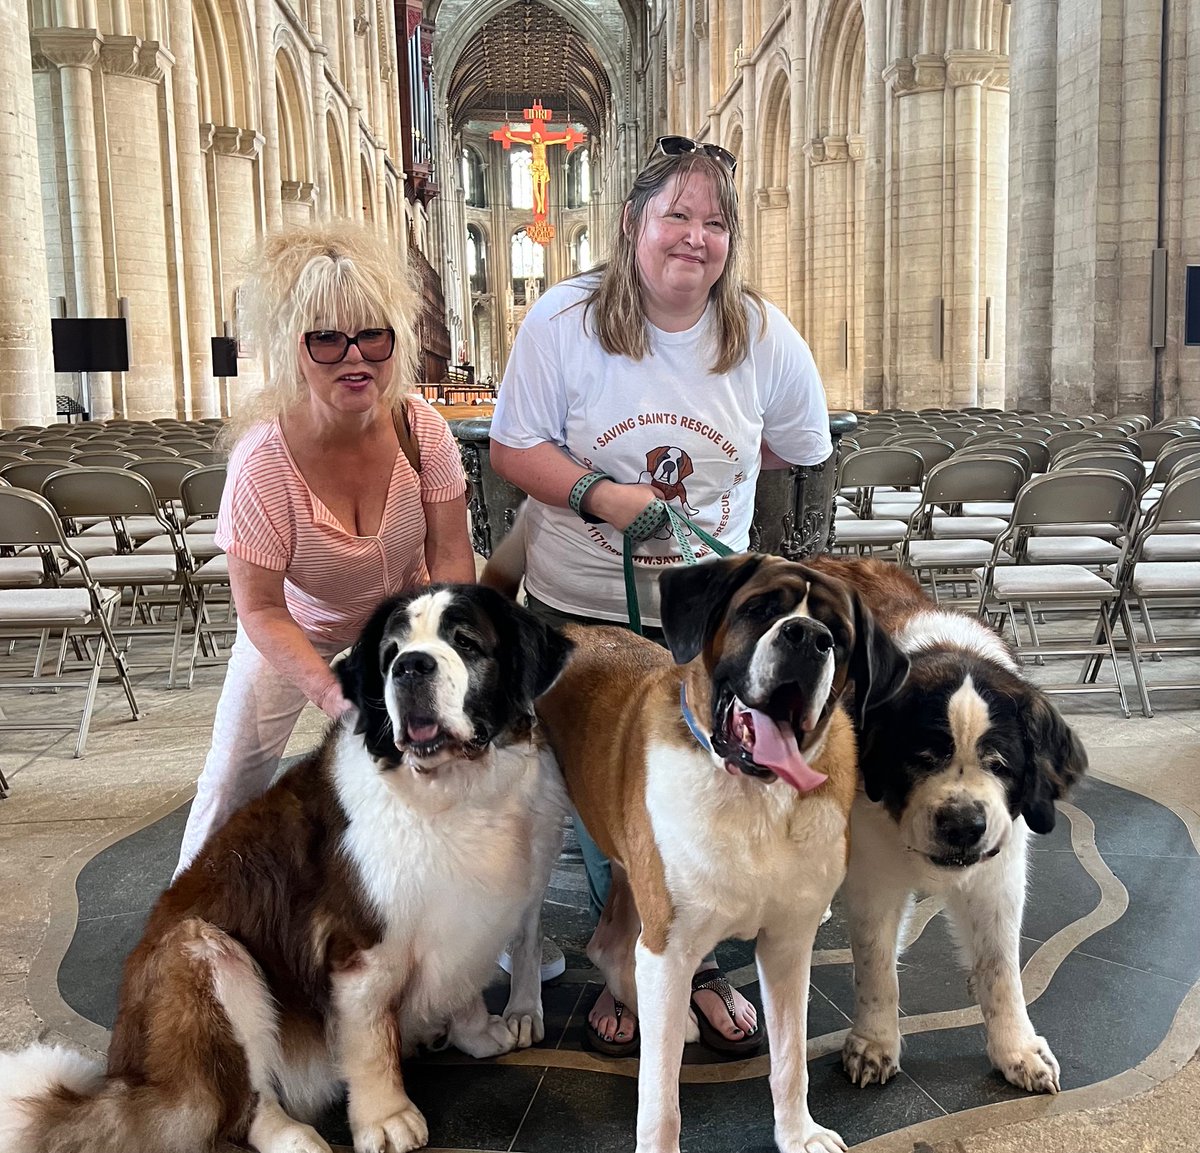 🐶Saving Saints brought their big-hearted St. Bernards to the Cathedral for some furry fun this morning! We celebrated the positive impact of companion animals on mental health as part of Mental Health Awareness Week. Well behaved dogs are always welcome at the Cathedral! 🐾